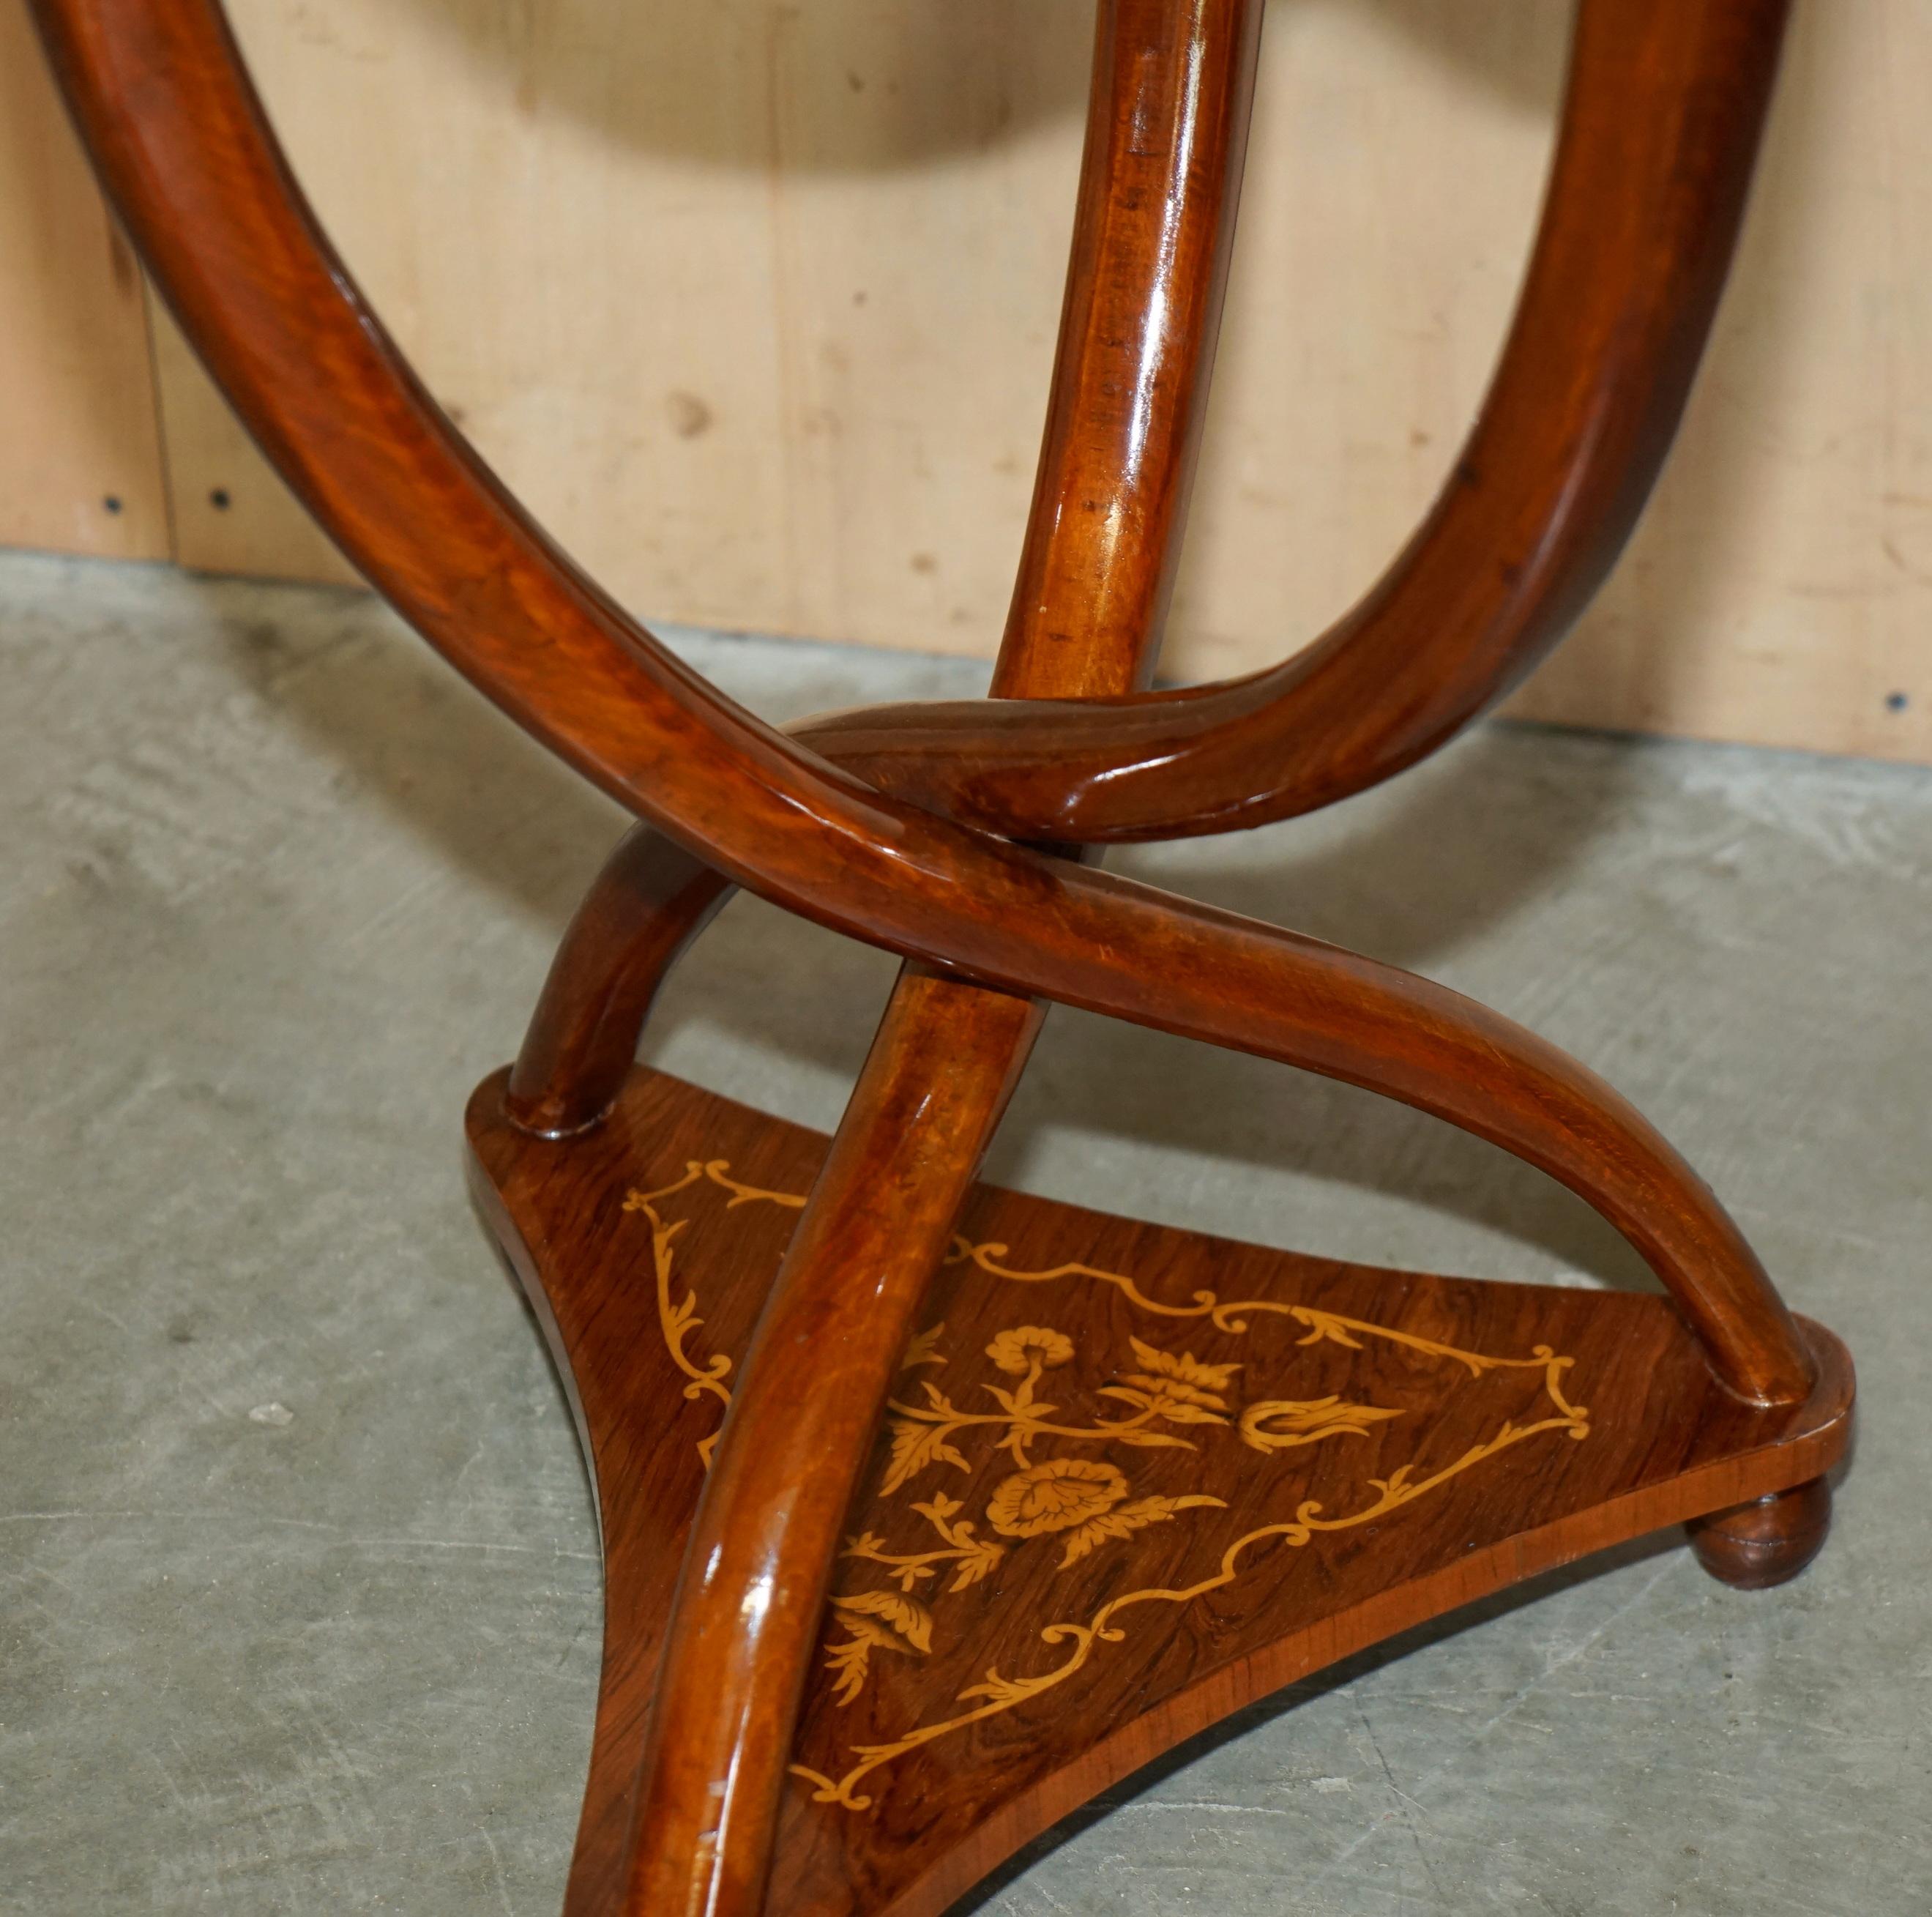 PAIR OF ART DECO STYLE SYCAMORE WOOD & WALNUT INLAID PEDESTAL SIDE END TABLEs For Sale 3